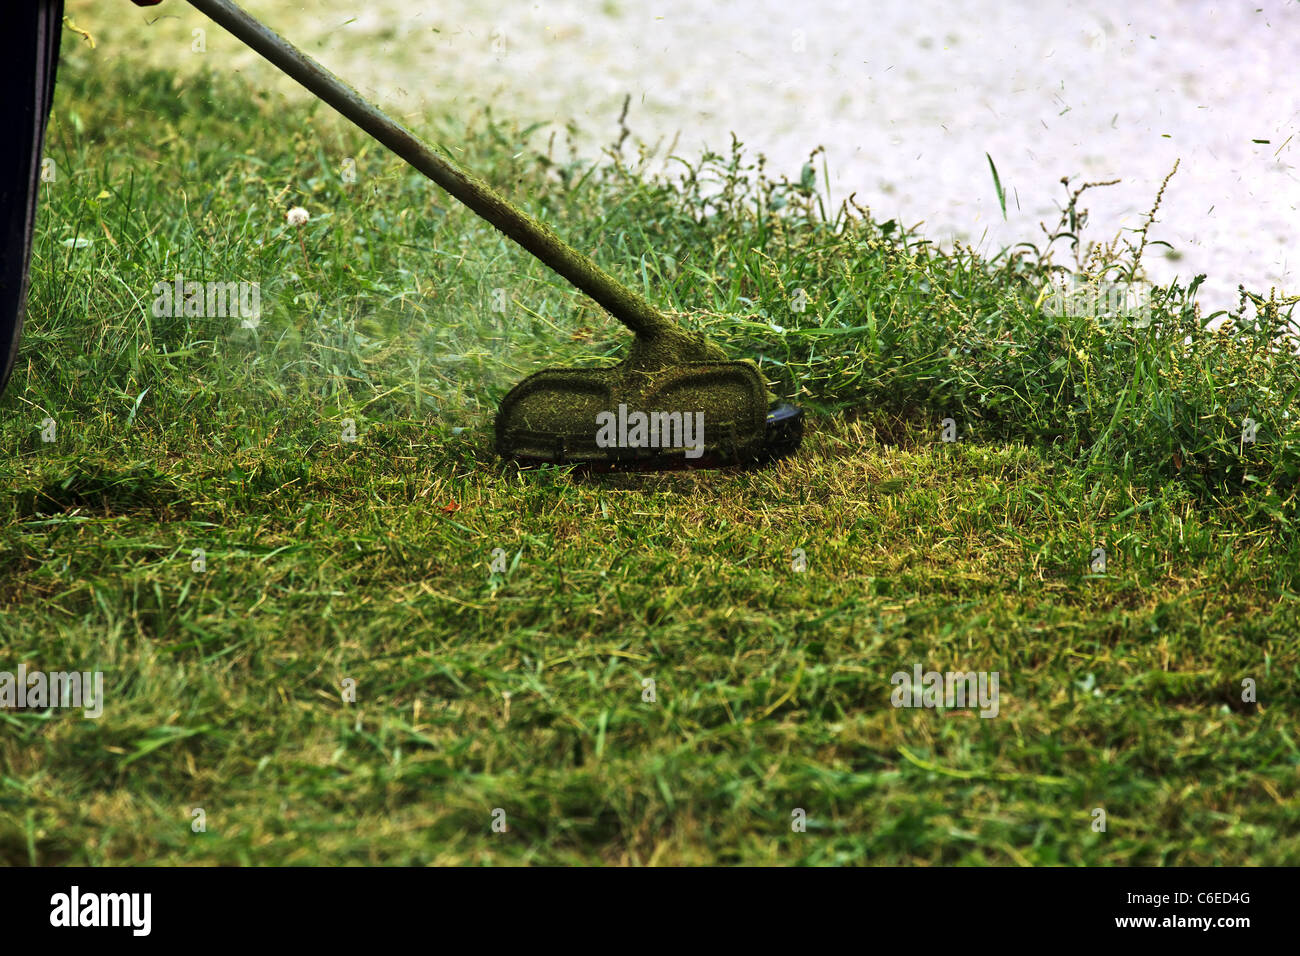 Close-up lawn mower triming grass near a road. Stock Photo